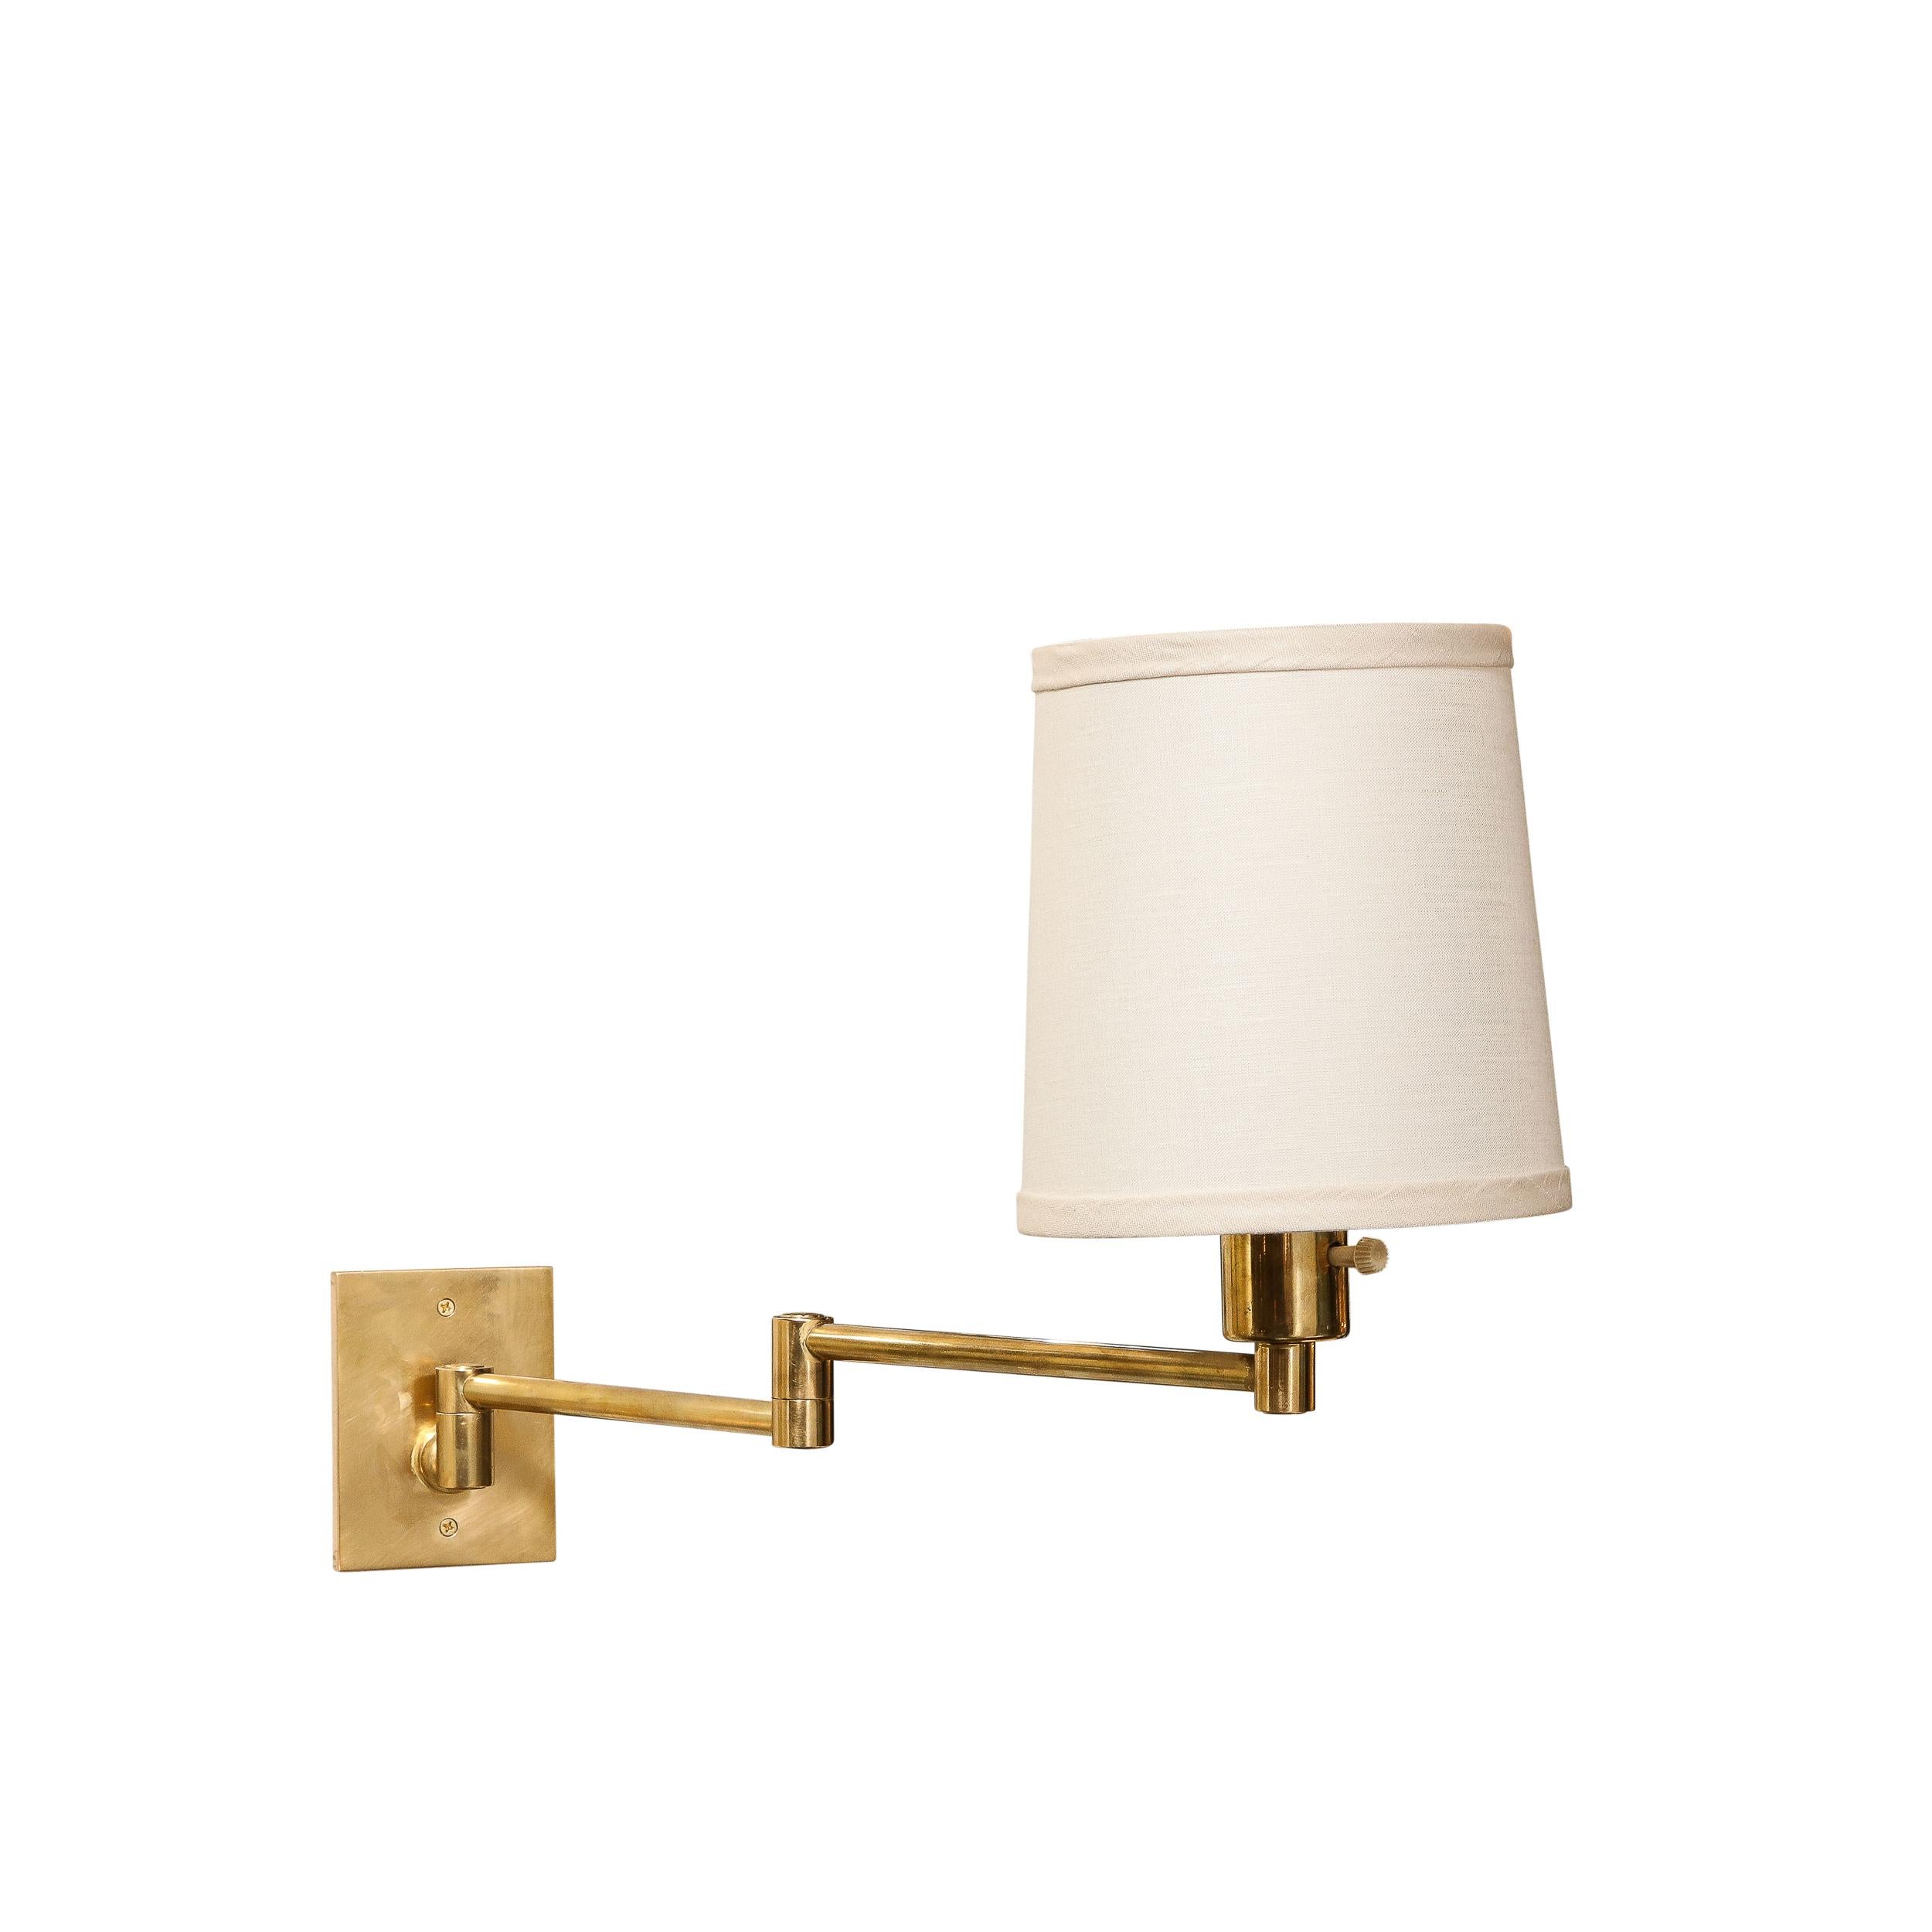 This brilliant pair of Mid-Century Modernist Articulating Wall Sconces in Polished Brass by George W. Hansen for Metalarte originate from Spain, Circa 1970. Featuring a beautiful geometric construction in polished brass with two cylindrical hinged